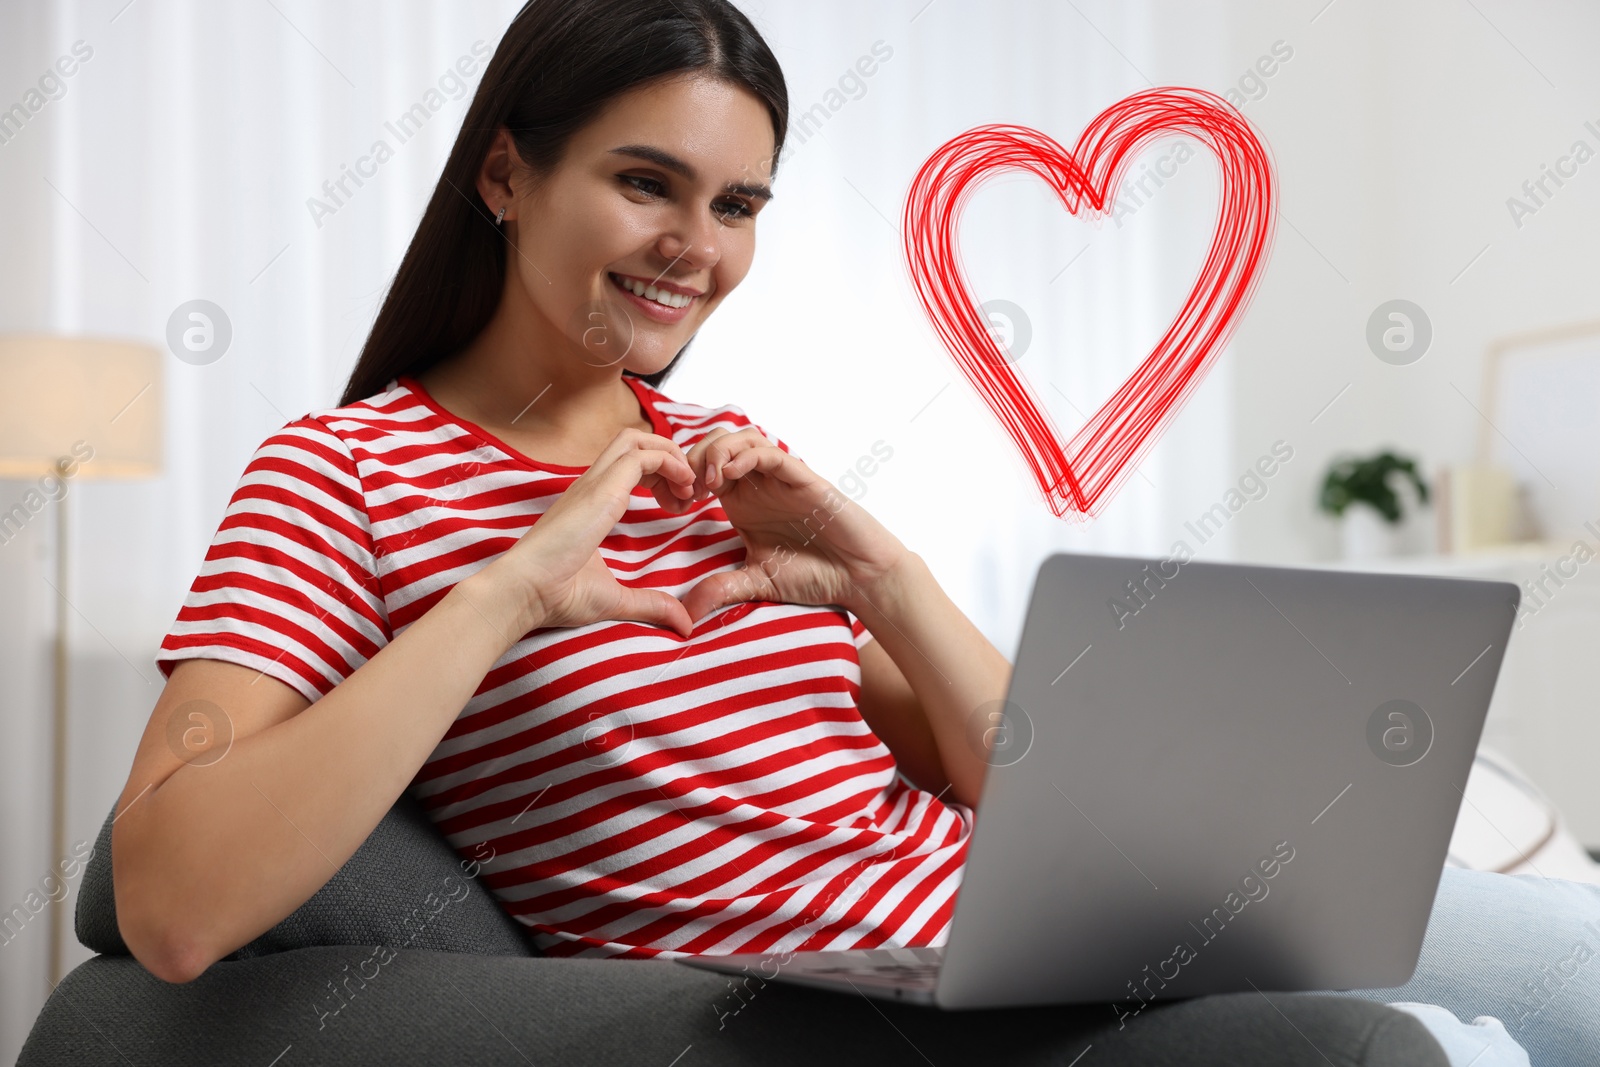 Image of Long distance relationship. Young woman having video chat with her loved one indoors. Red heart near her